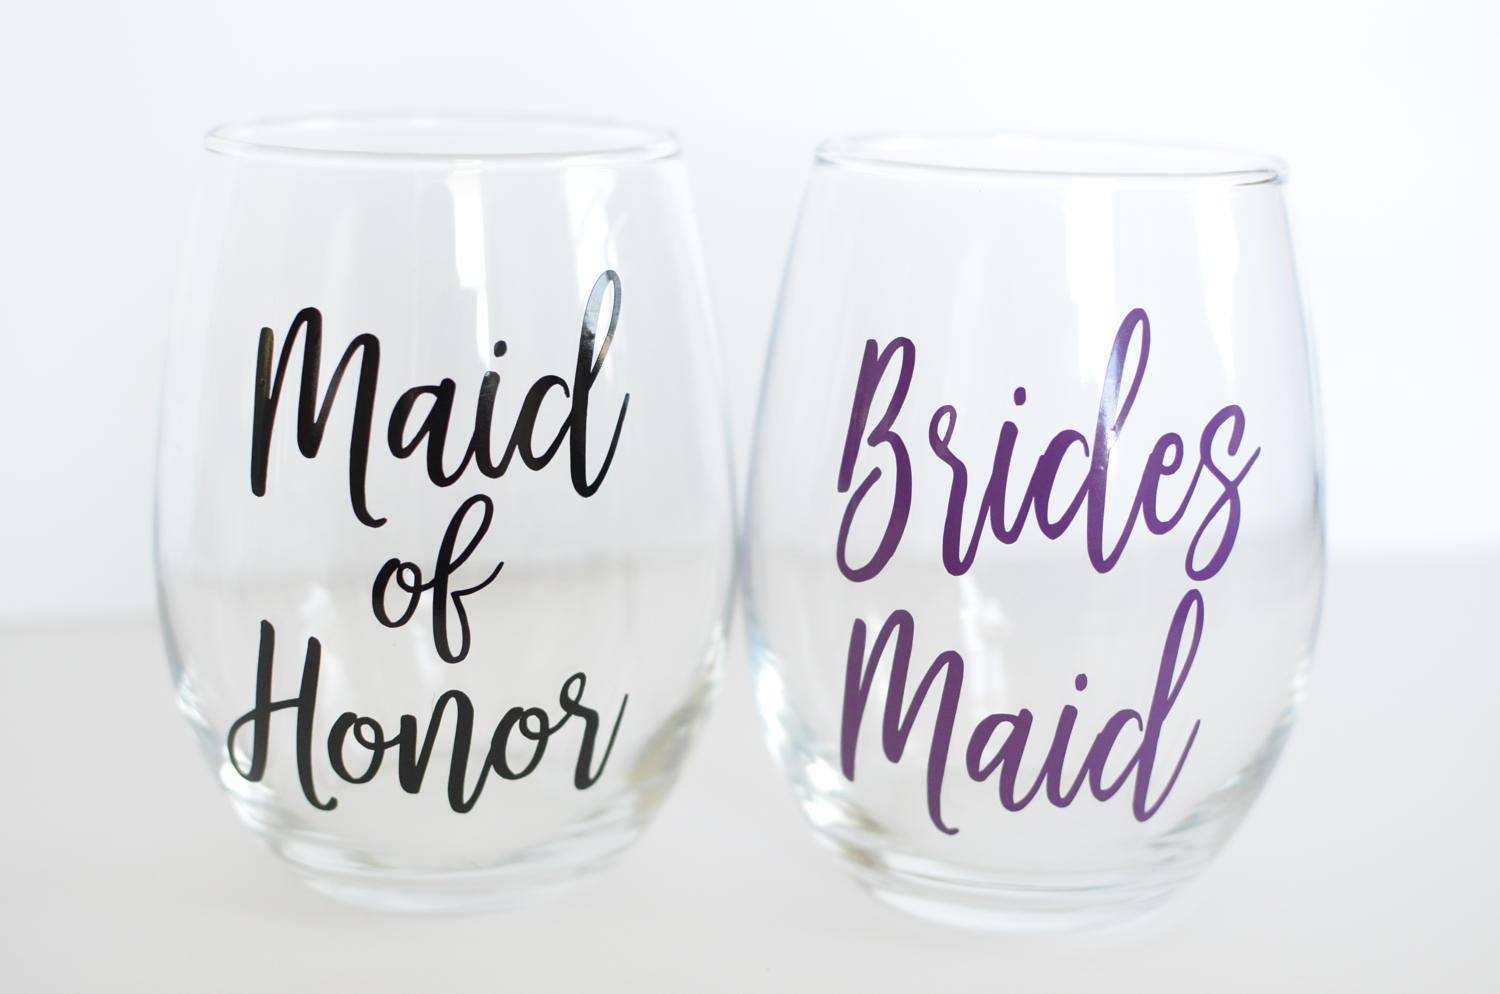 10 oz Wine Glass Goblet Wedding Bride Will you be my Bridesmaid?